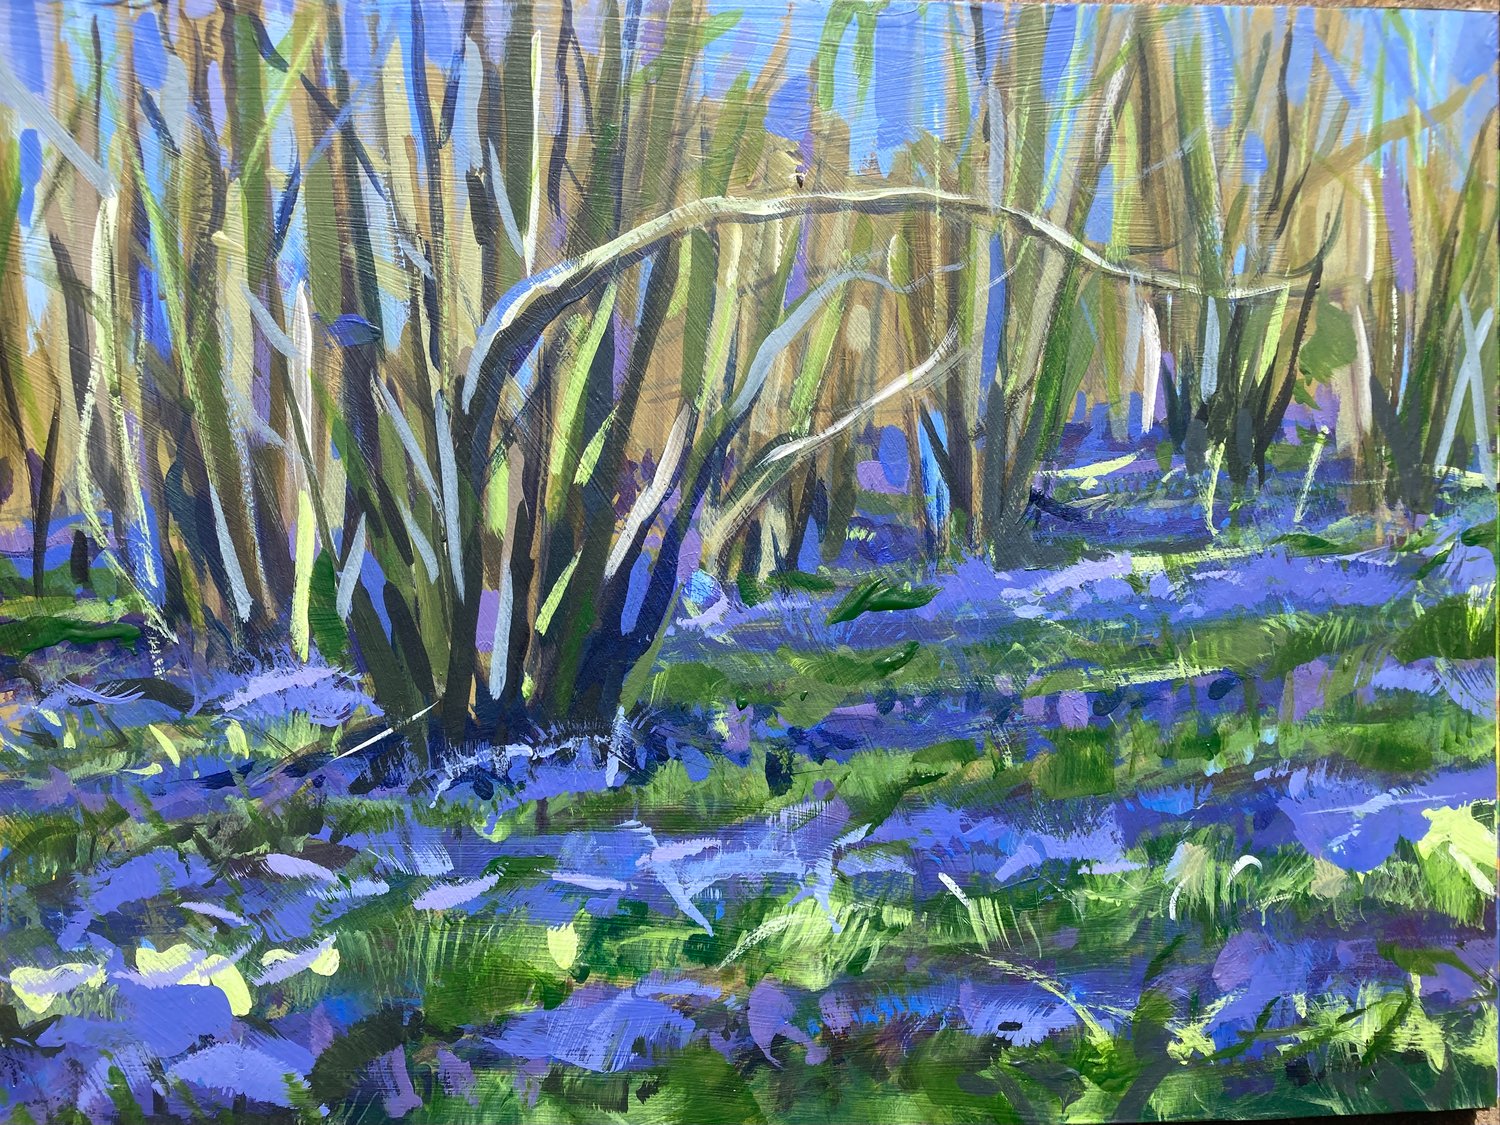 Image of Bluebells under Lime - Plein Air Acrylic study